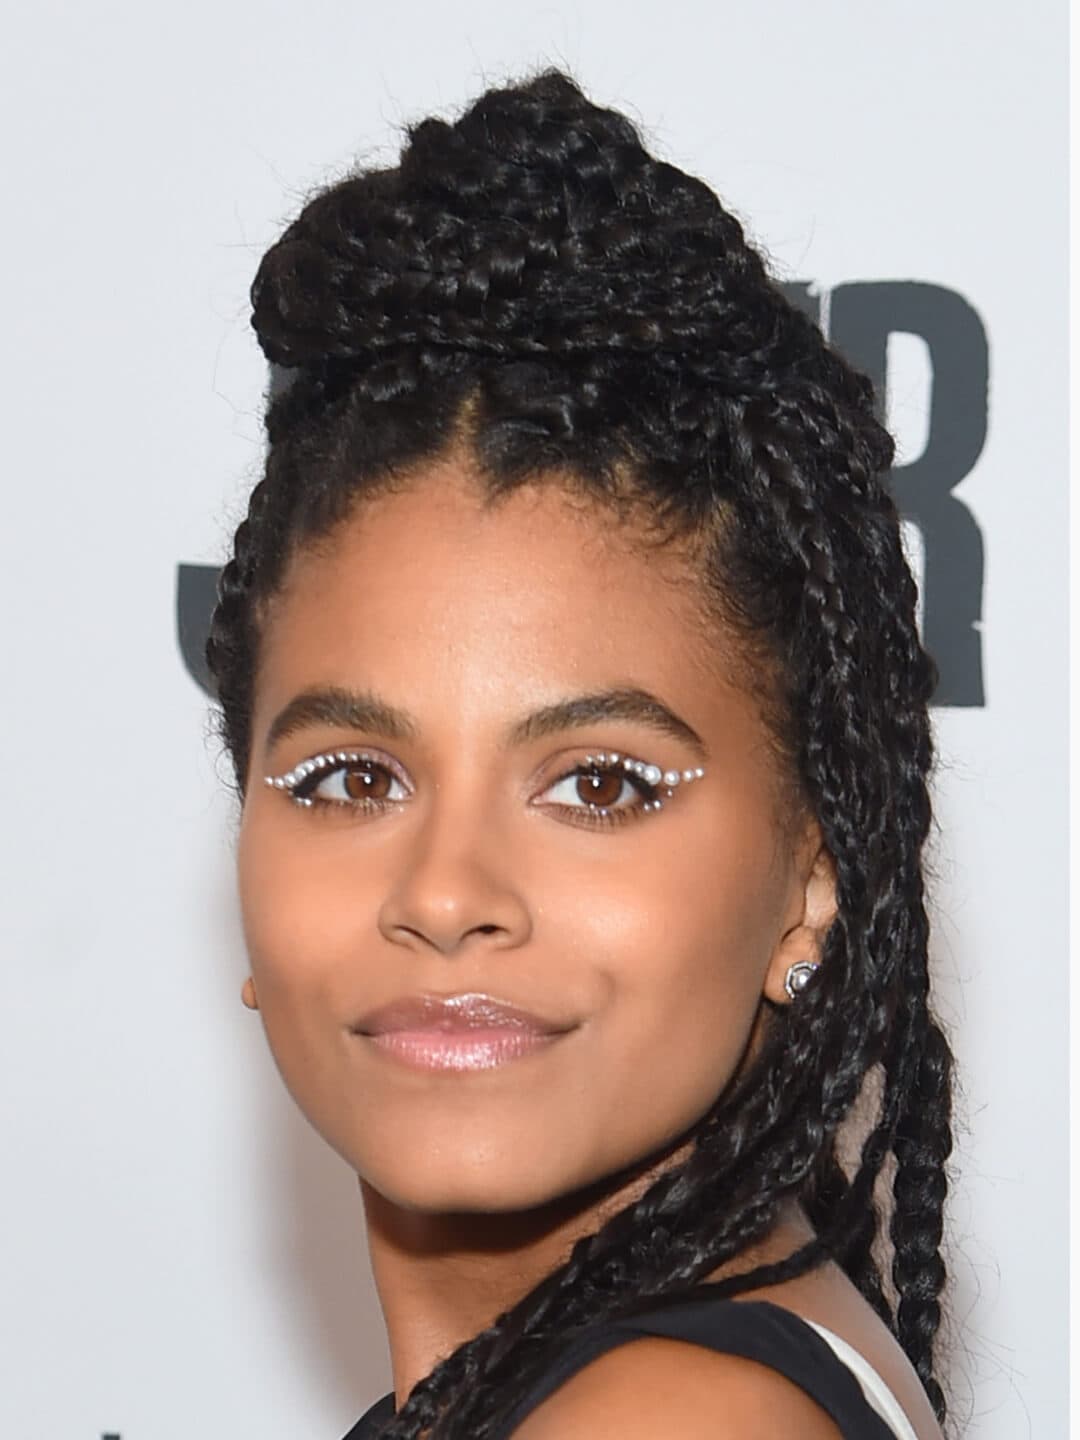 Zazie Beetz looking glam with a pearl-studded eyeliner look and half up braided hairstyle